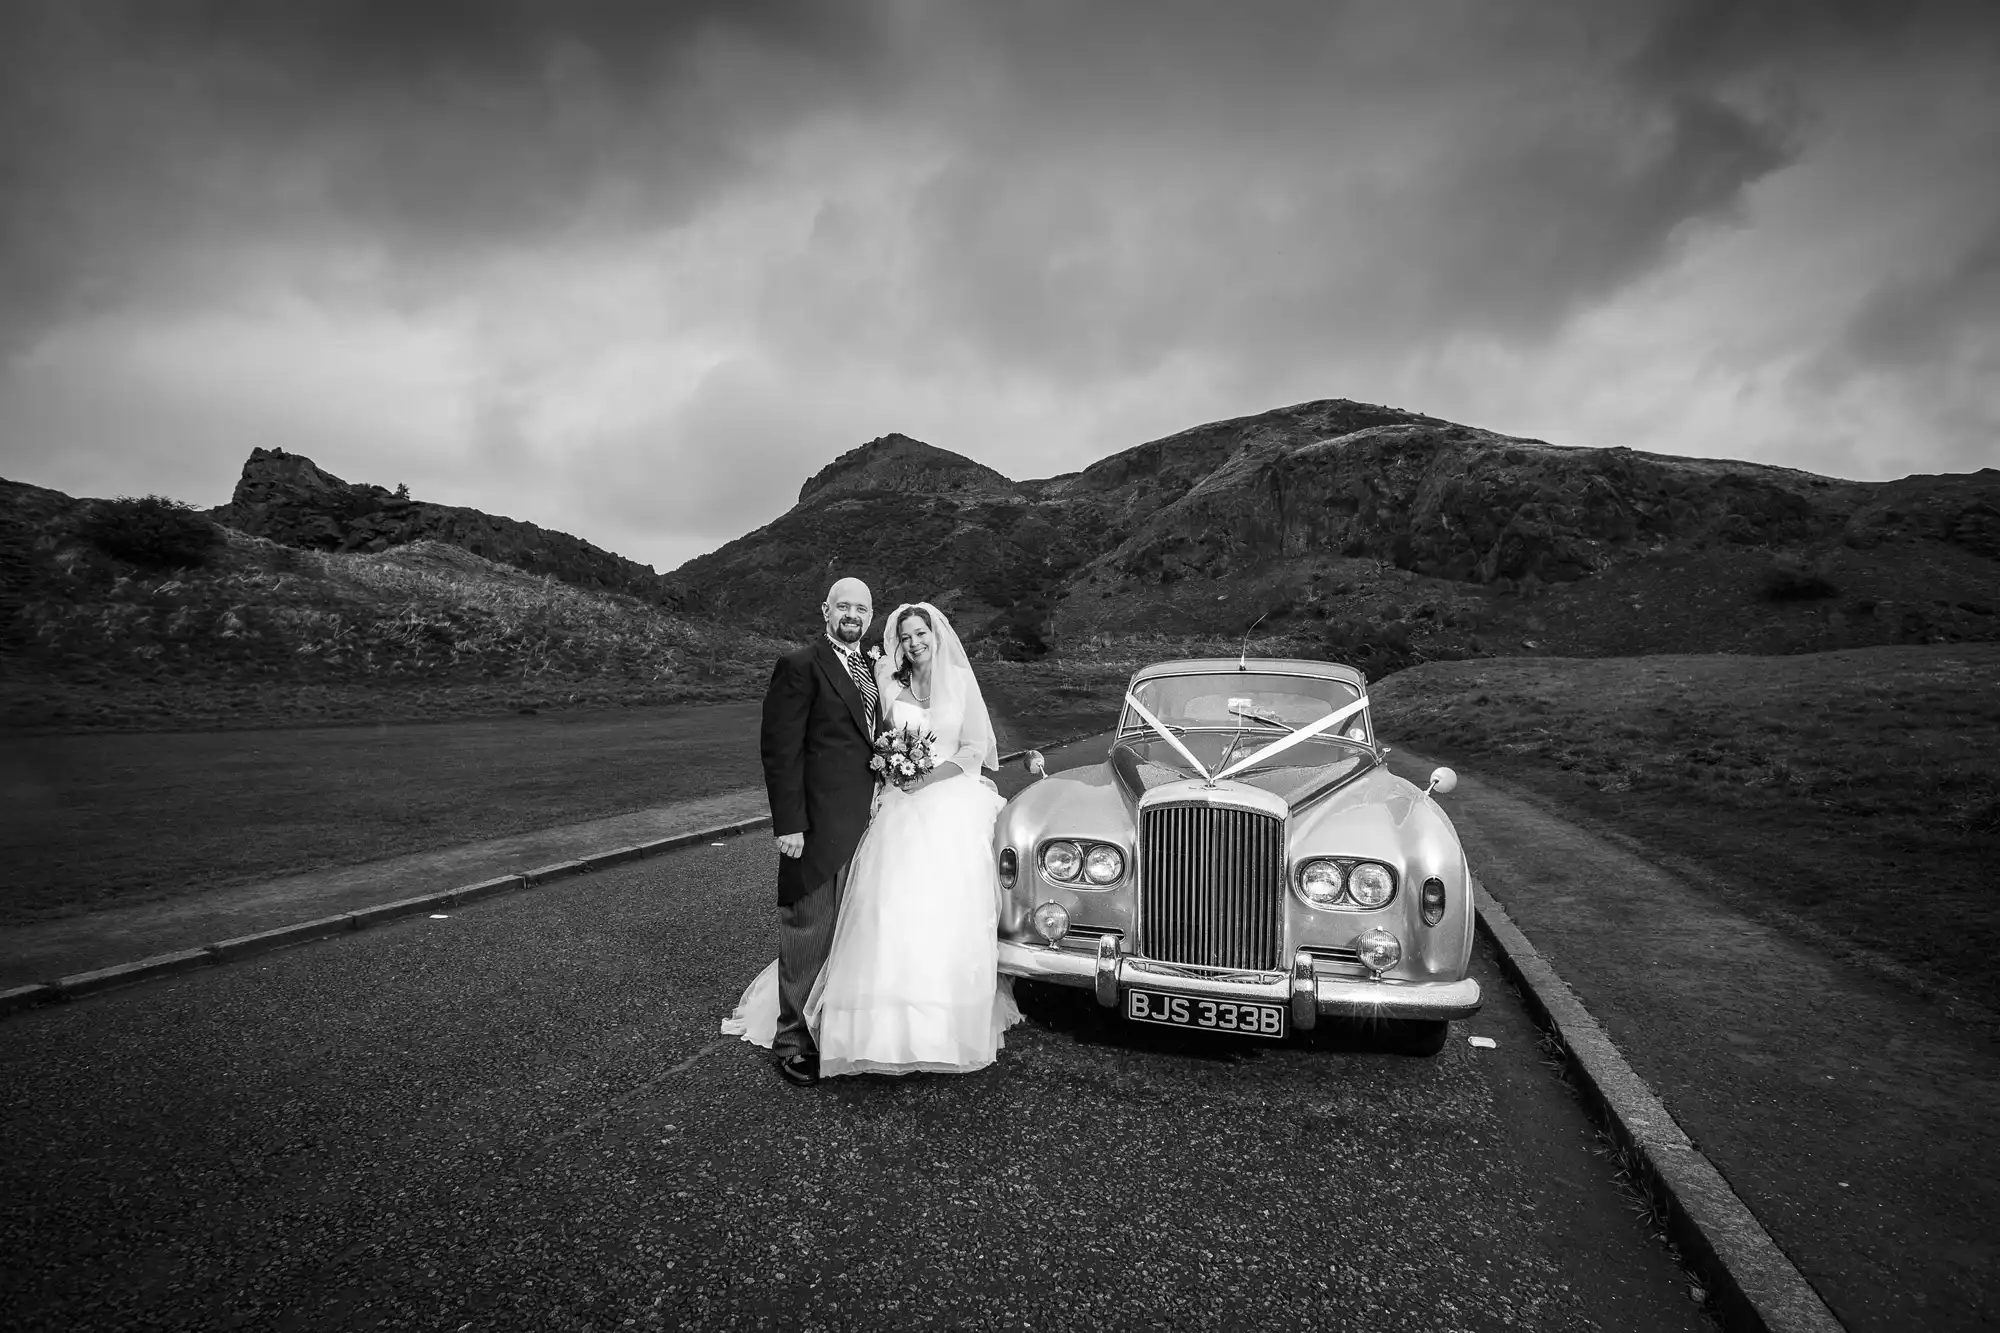 A bride and groom stand beside a classic car on a cloudy day in a mountainous landscape, both smiling at the camera.